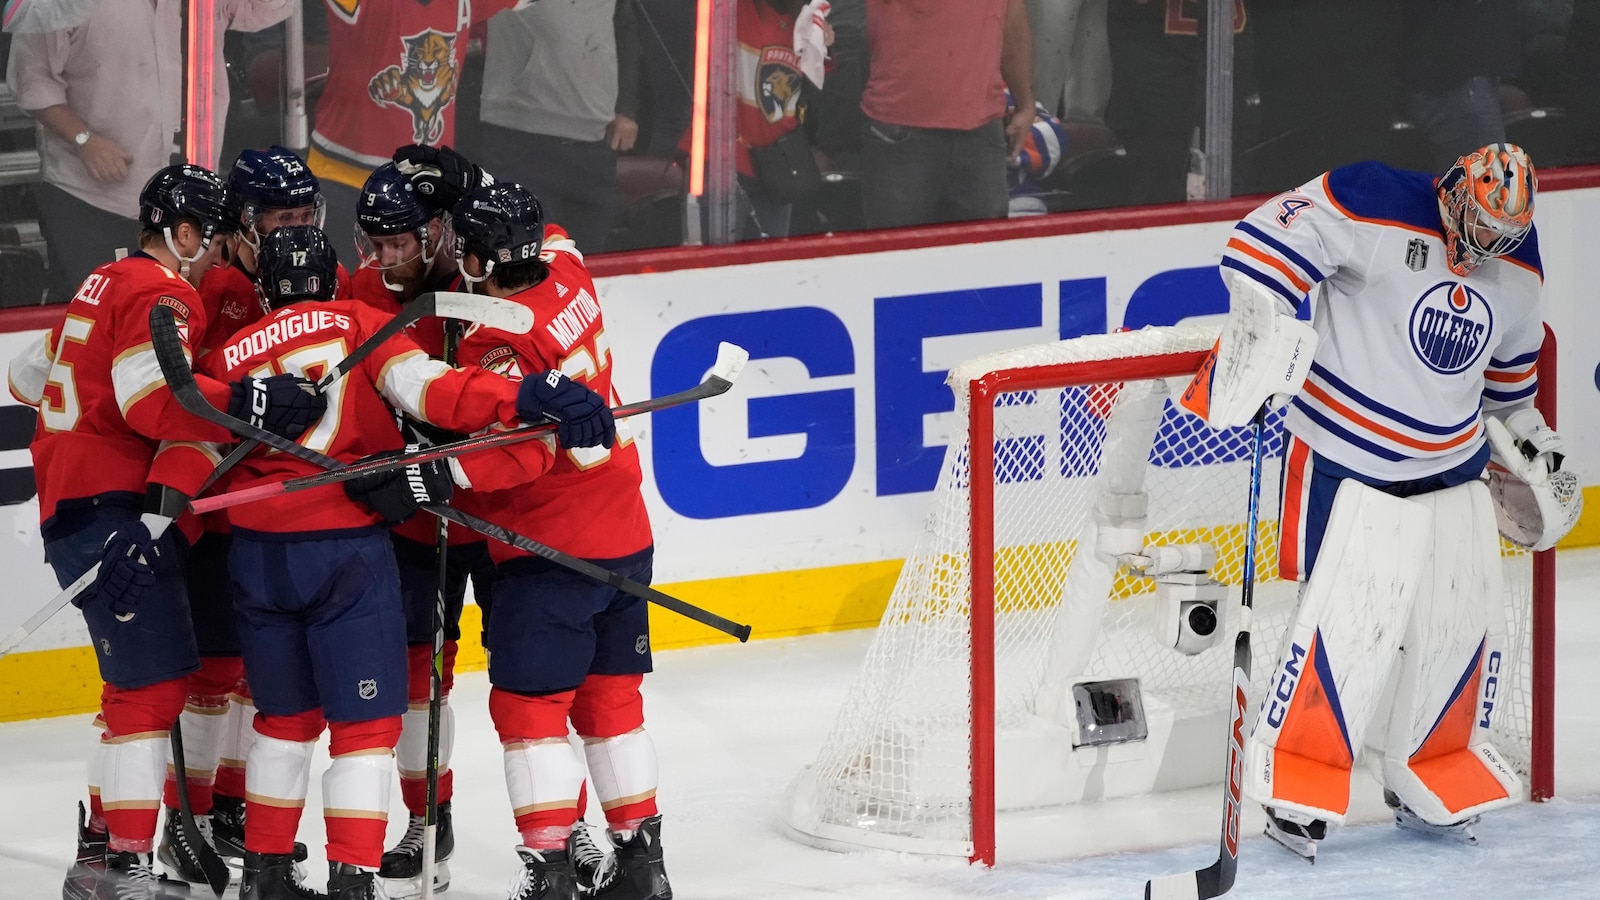 Florida Panthers Win First Stanley Cup by Defeating Edmonton Oilers 2-1 in Game 7